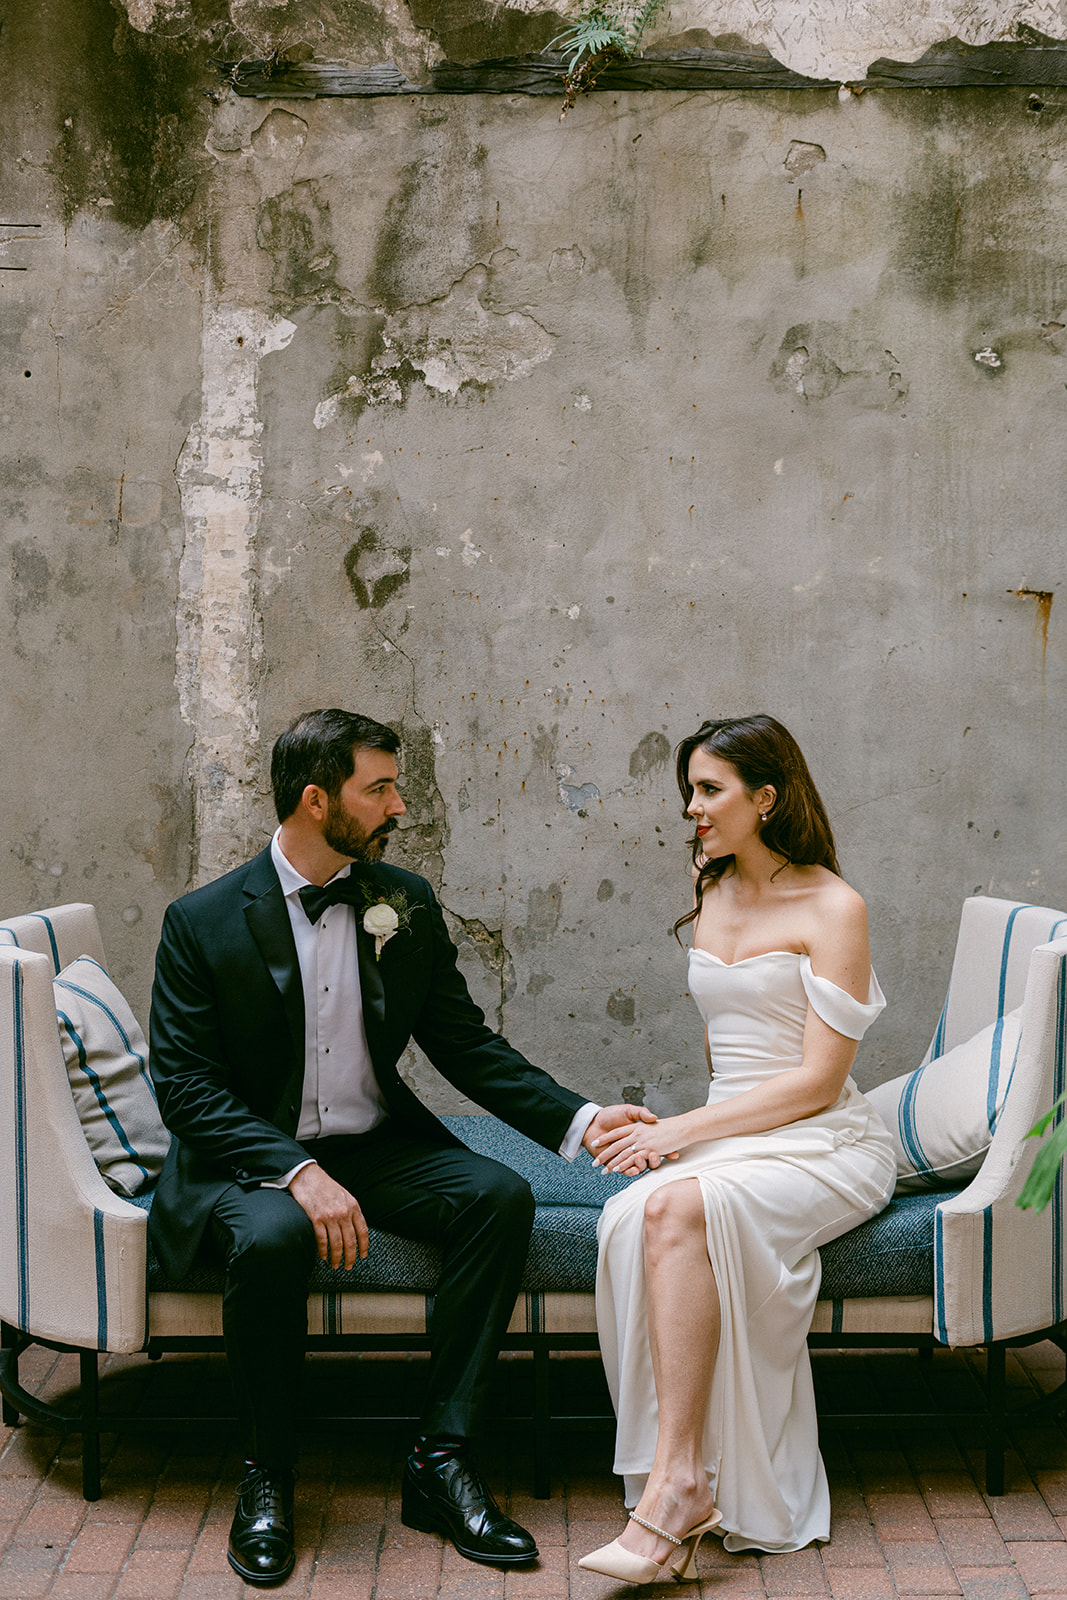 Bride and Groom portrait on their wedding day at the Eliza Jane Hotel